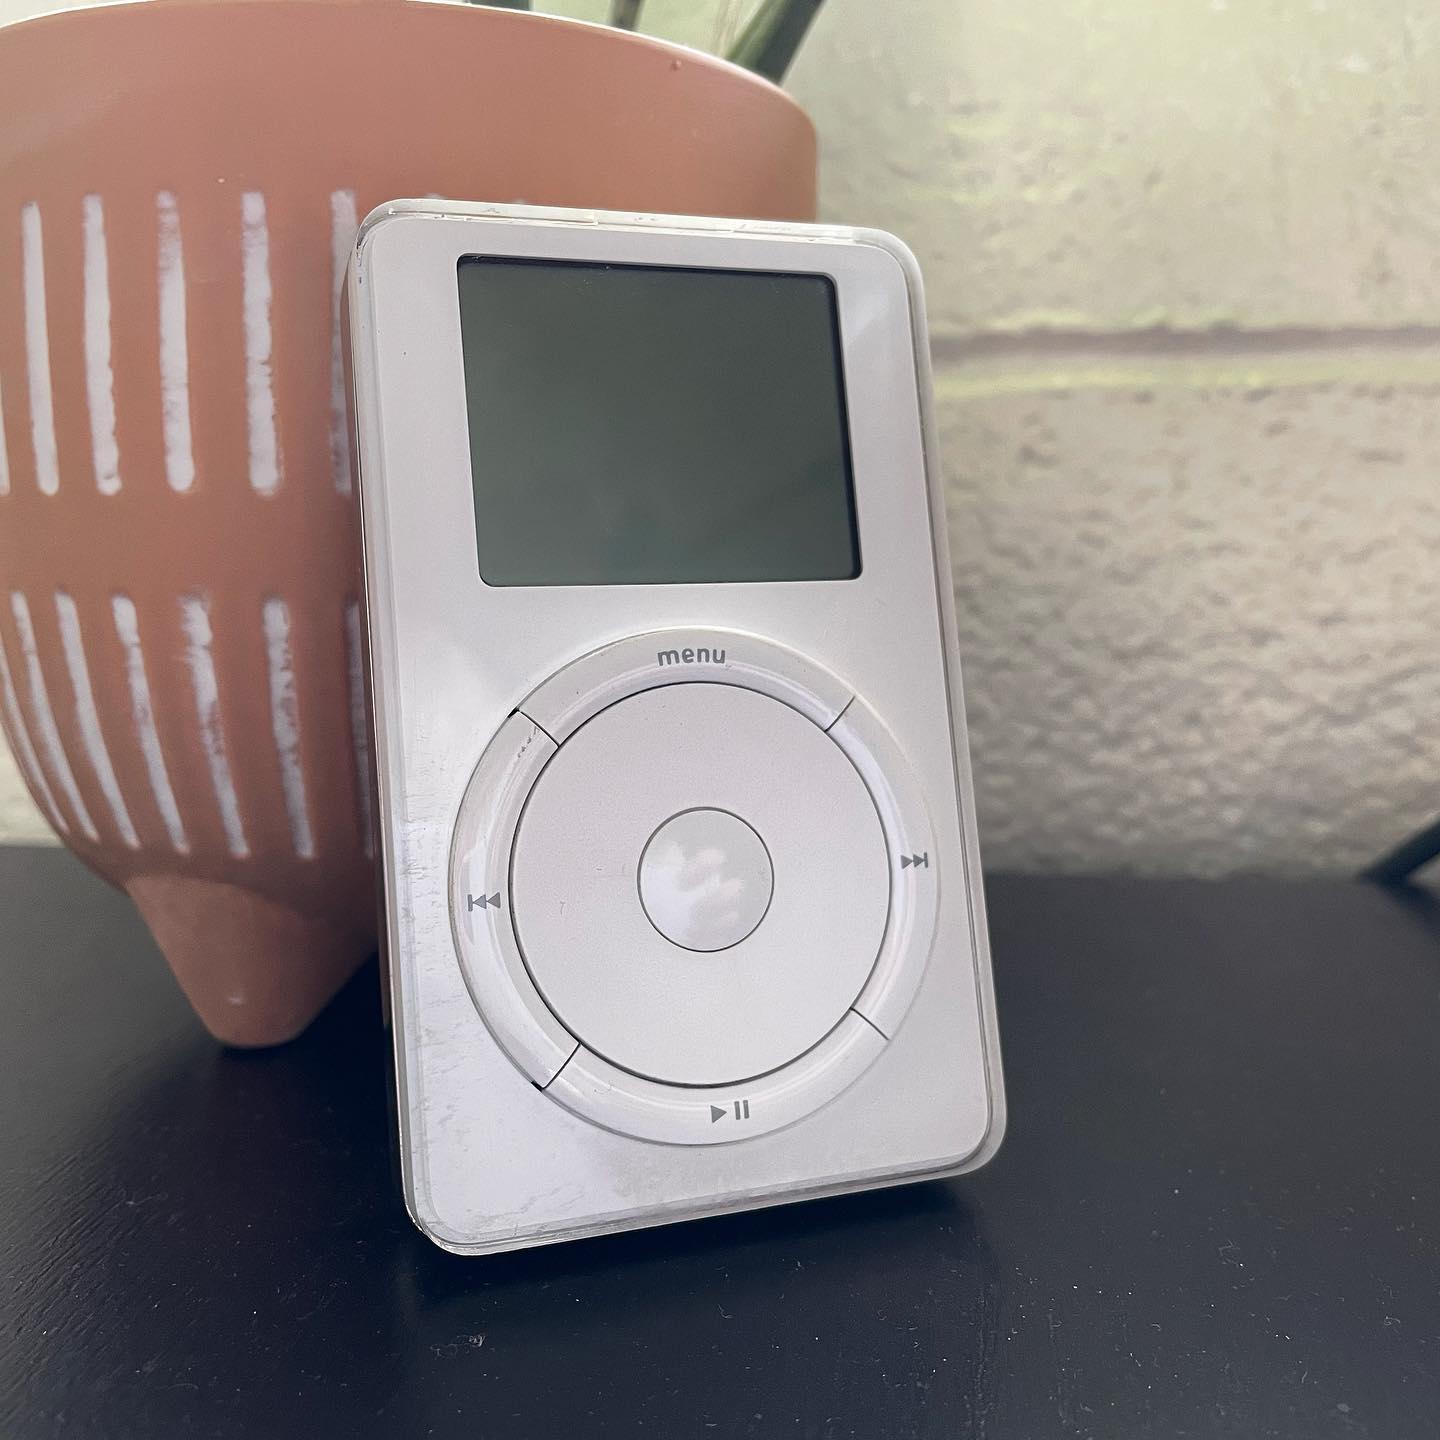 iPod has been discontinued. It changed the world. Thanks for all the music and memories. @apple